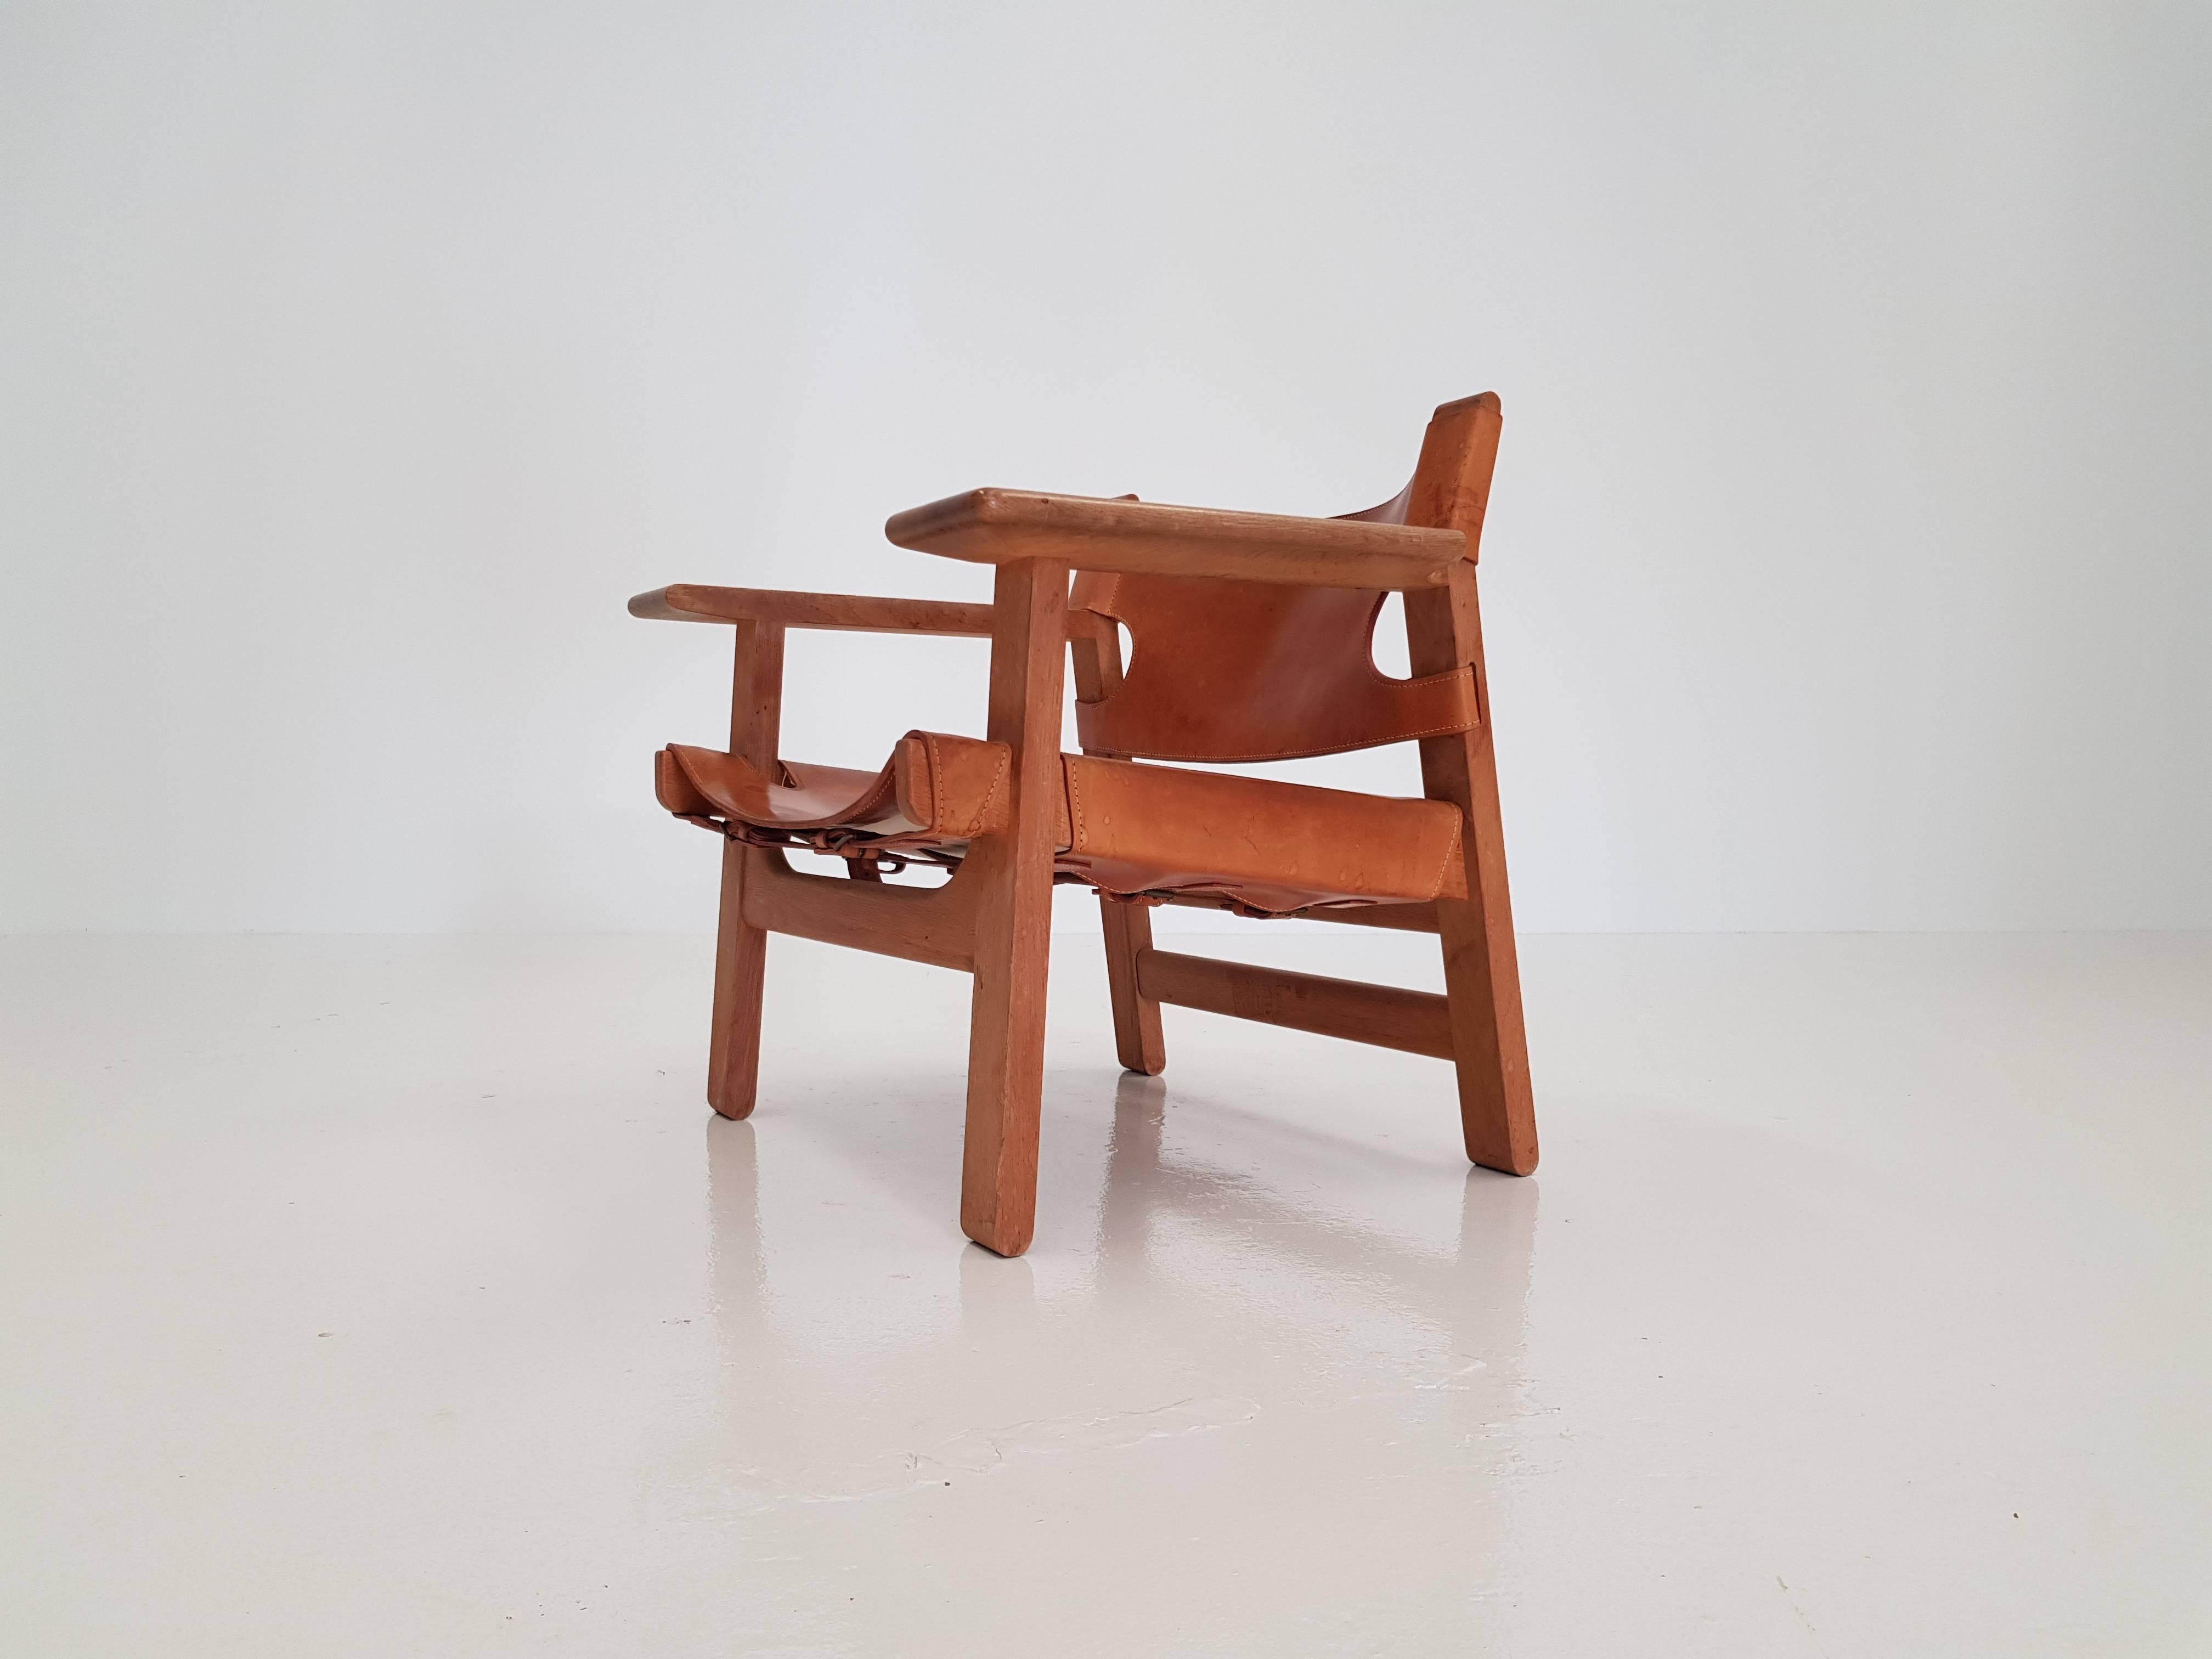 Patinated Børge Mogensen Spanish Chair, Designed 1958, Produced by Fredericia Stolefabrik